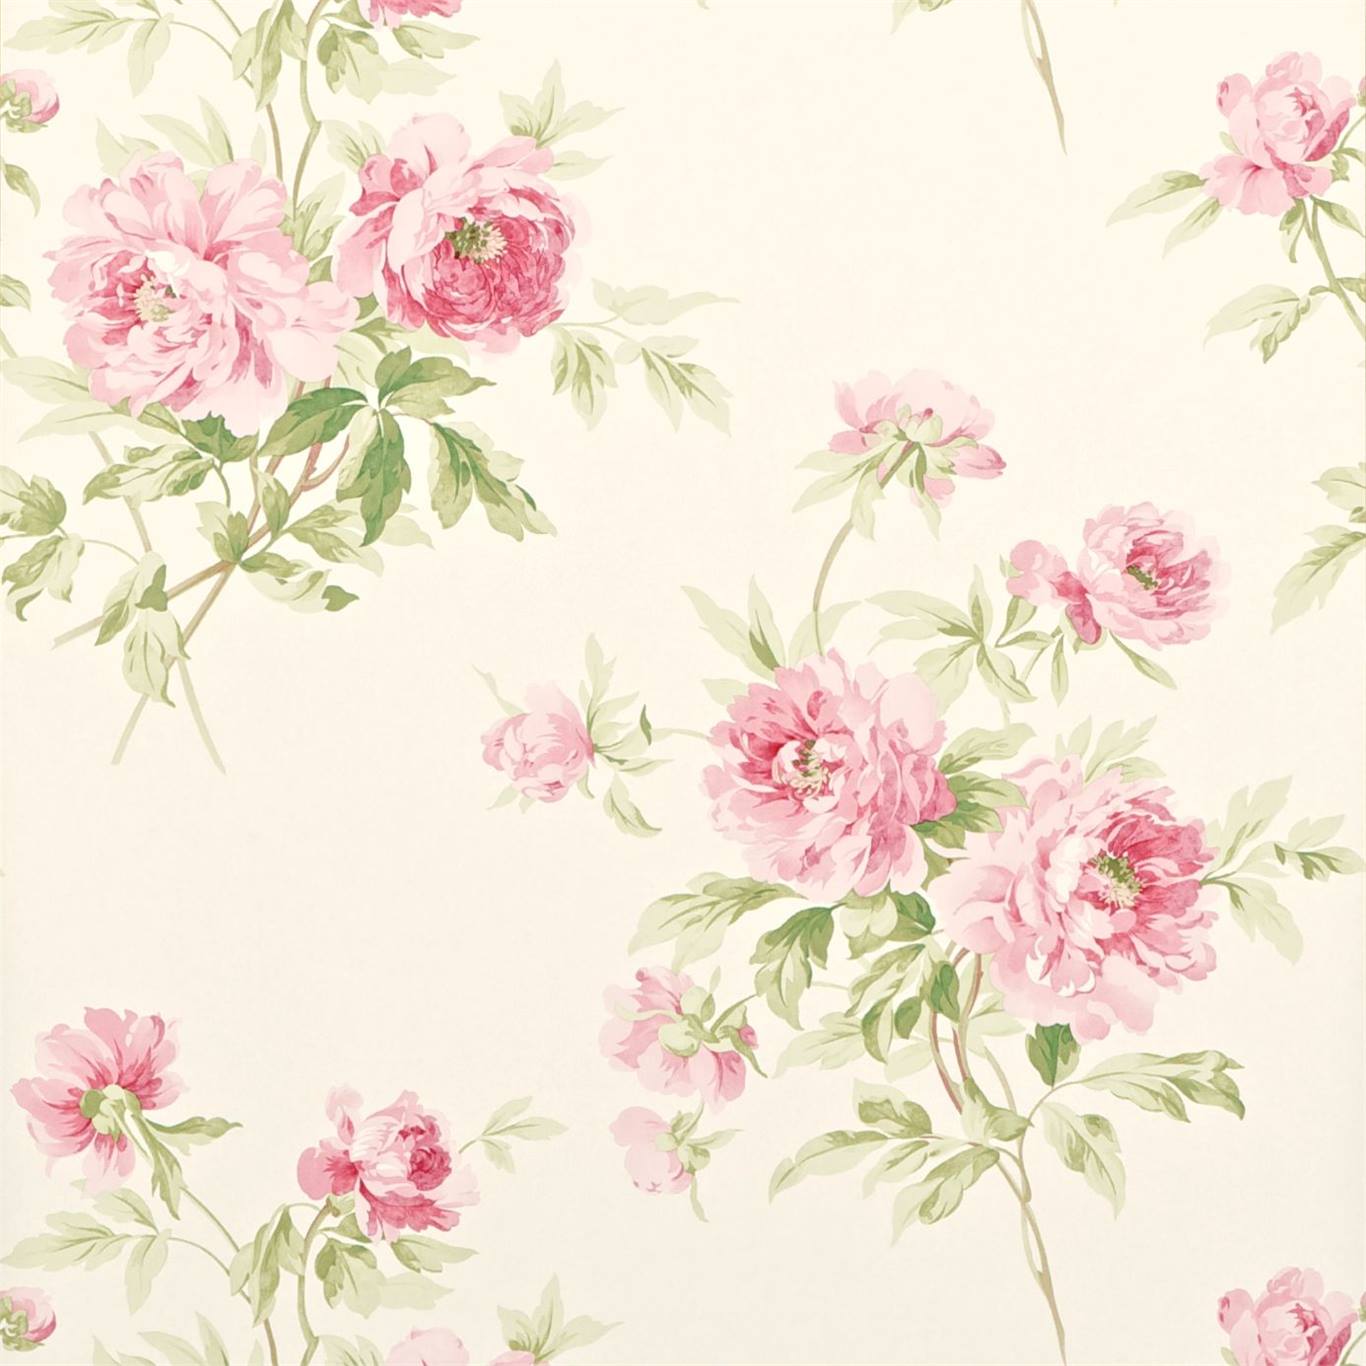 Adele, A Wallpaper By Sanderson, Part Of The Caverley - Vintage Rose Wallpaper Uk , HD Wallpaper & Backgrounds